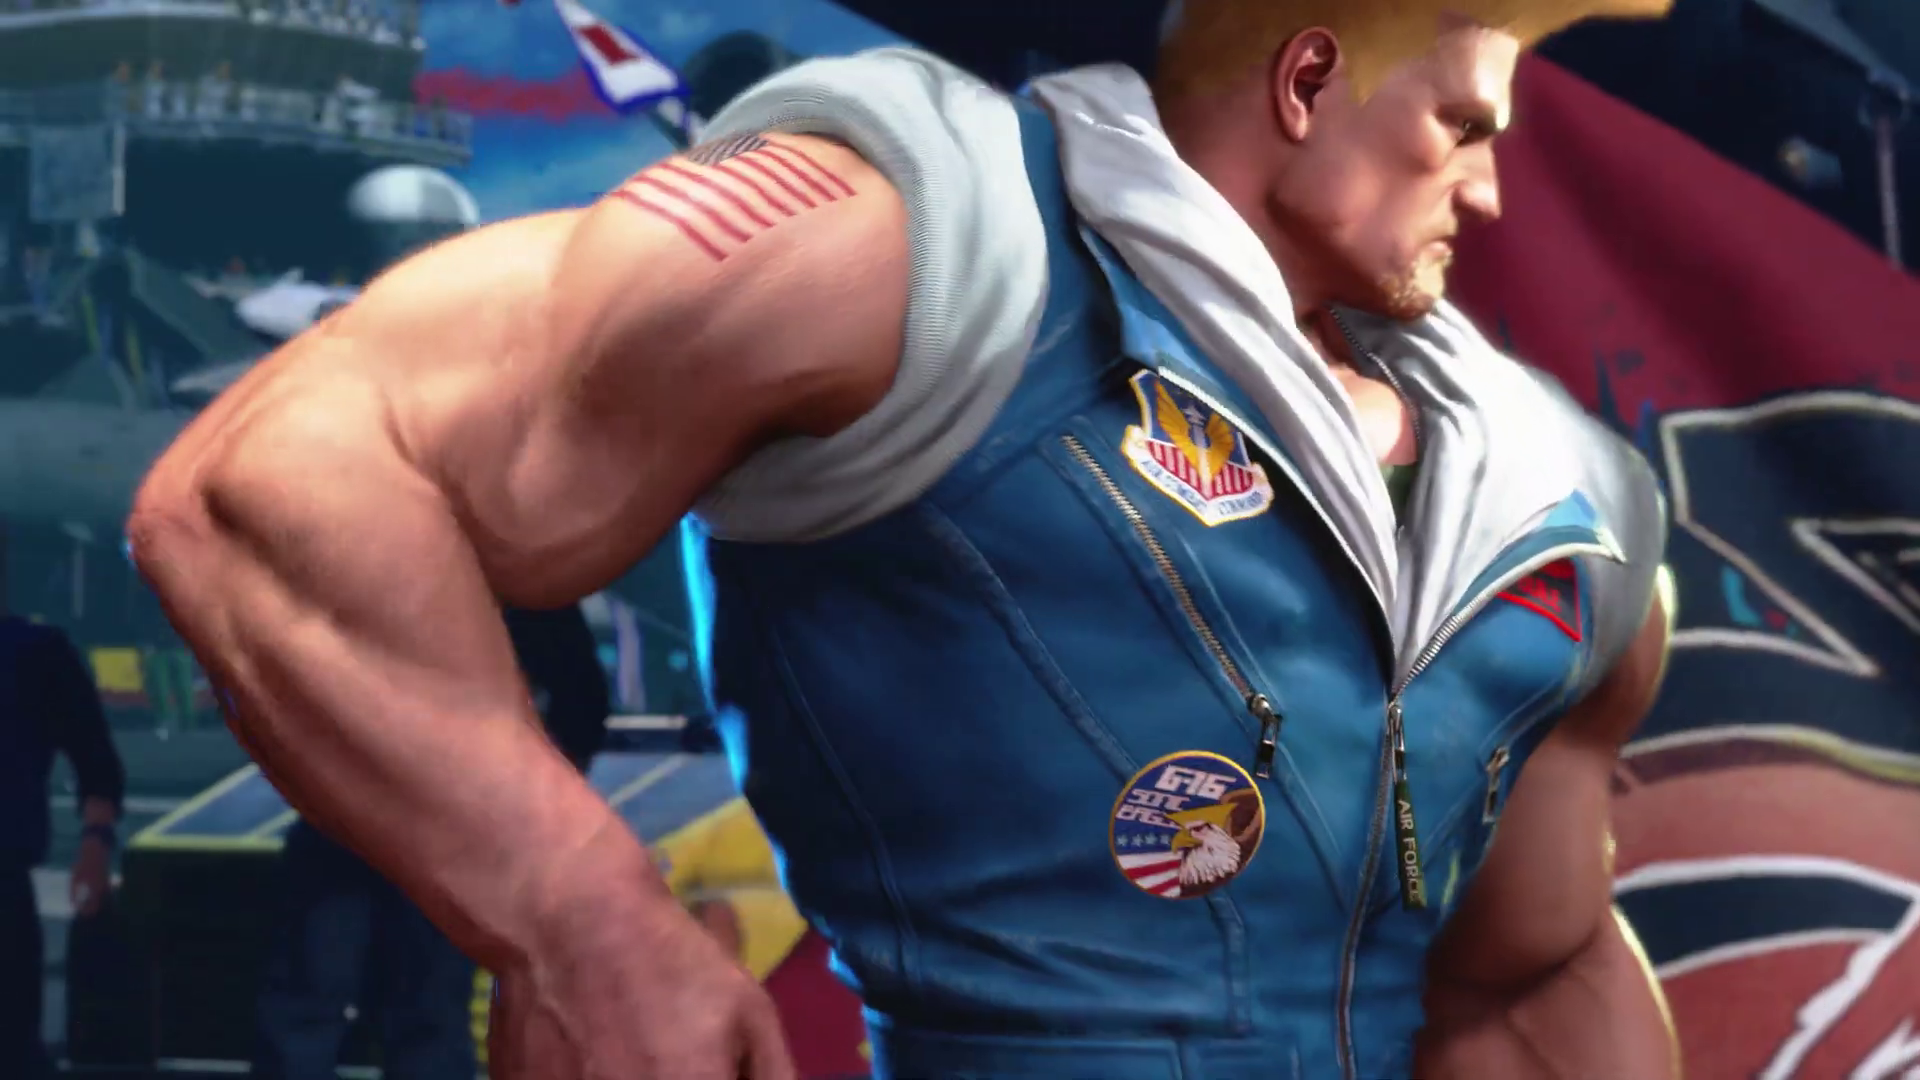 Street Fighter 6 Guile Official Reveal Trailer